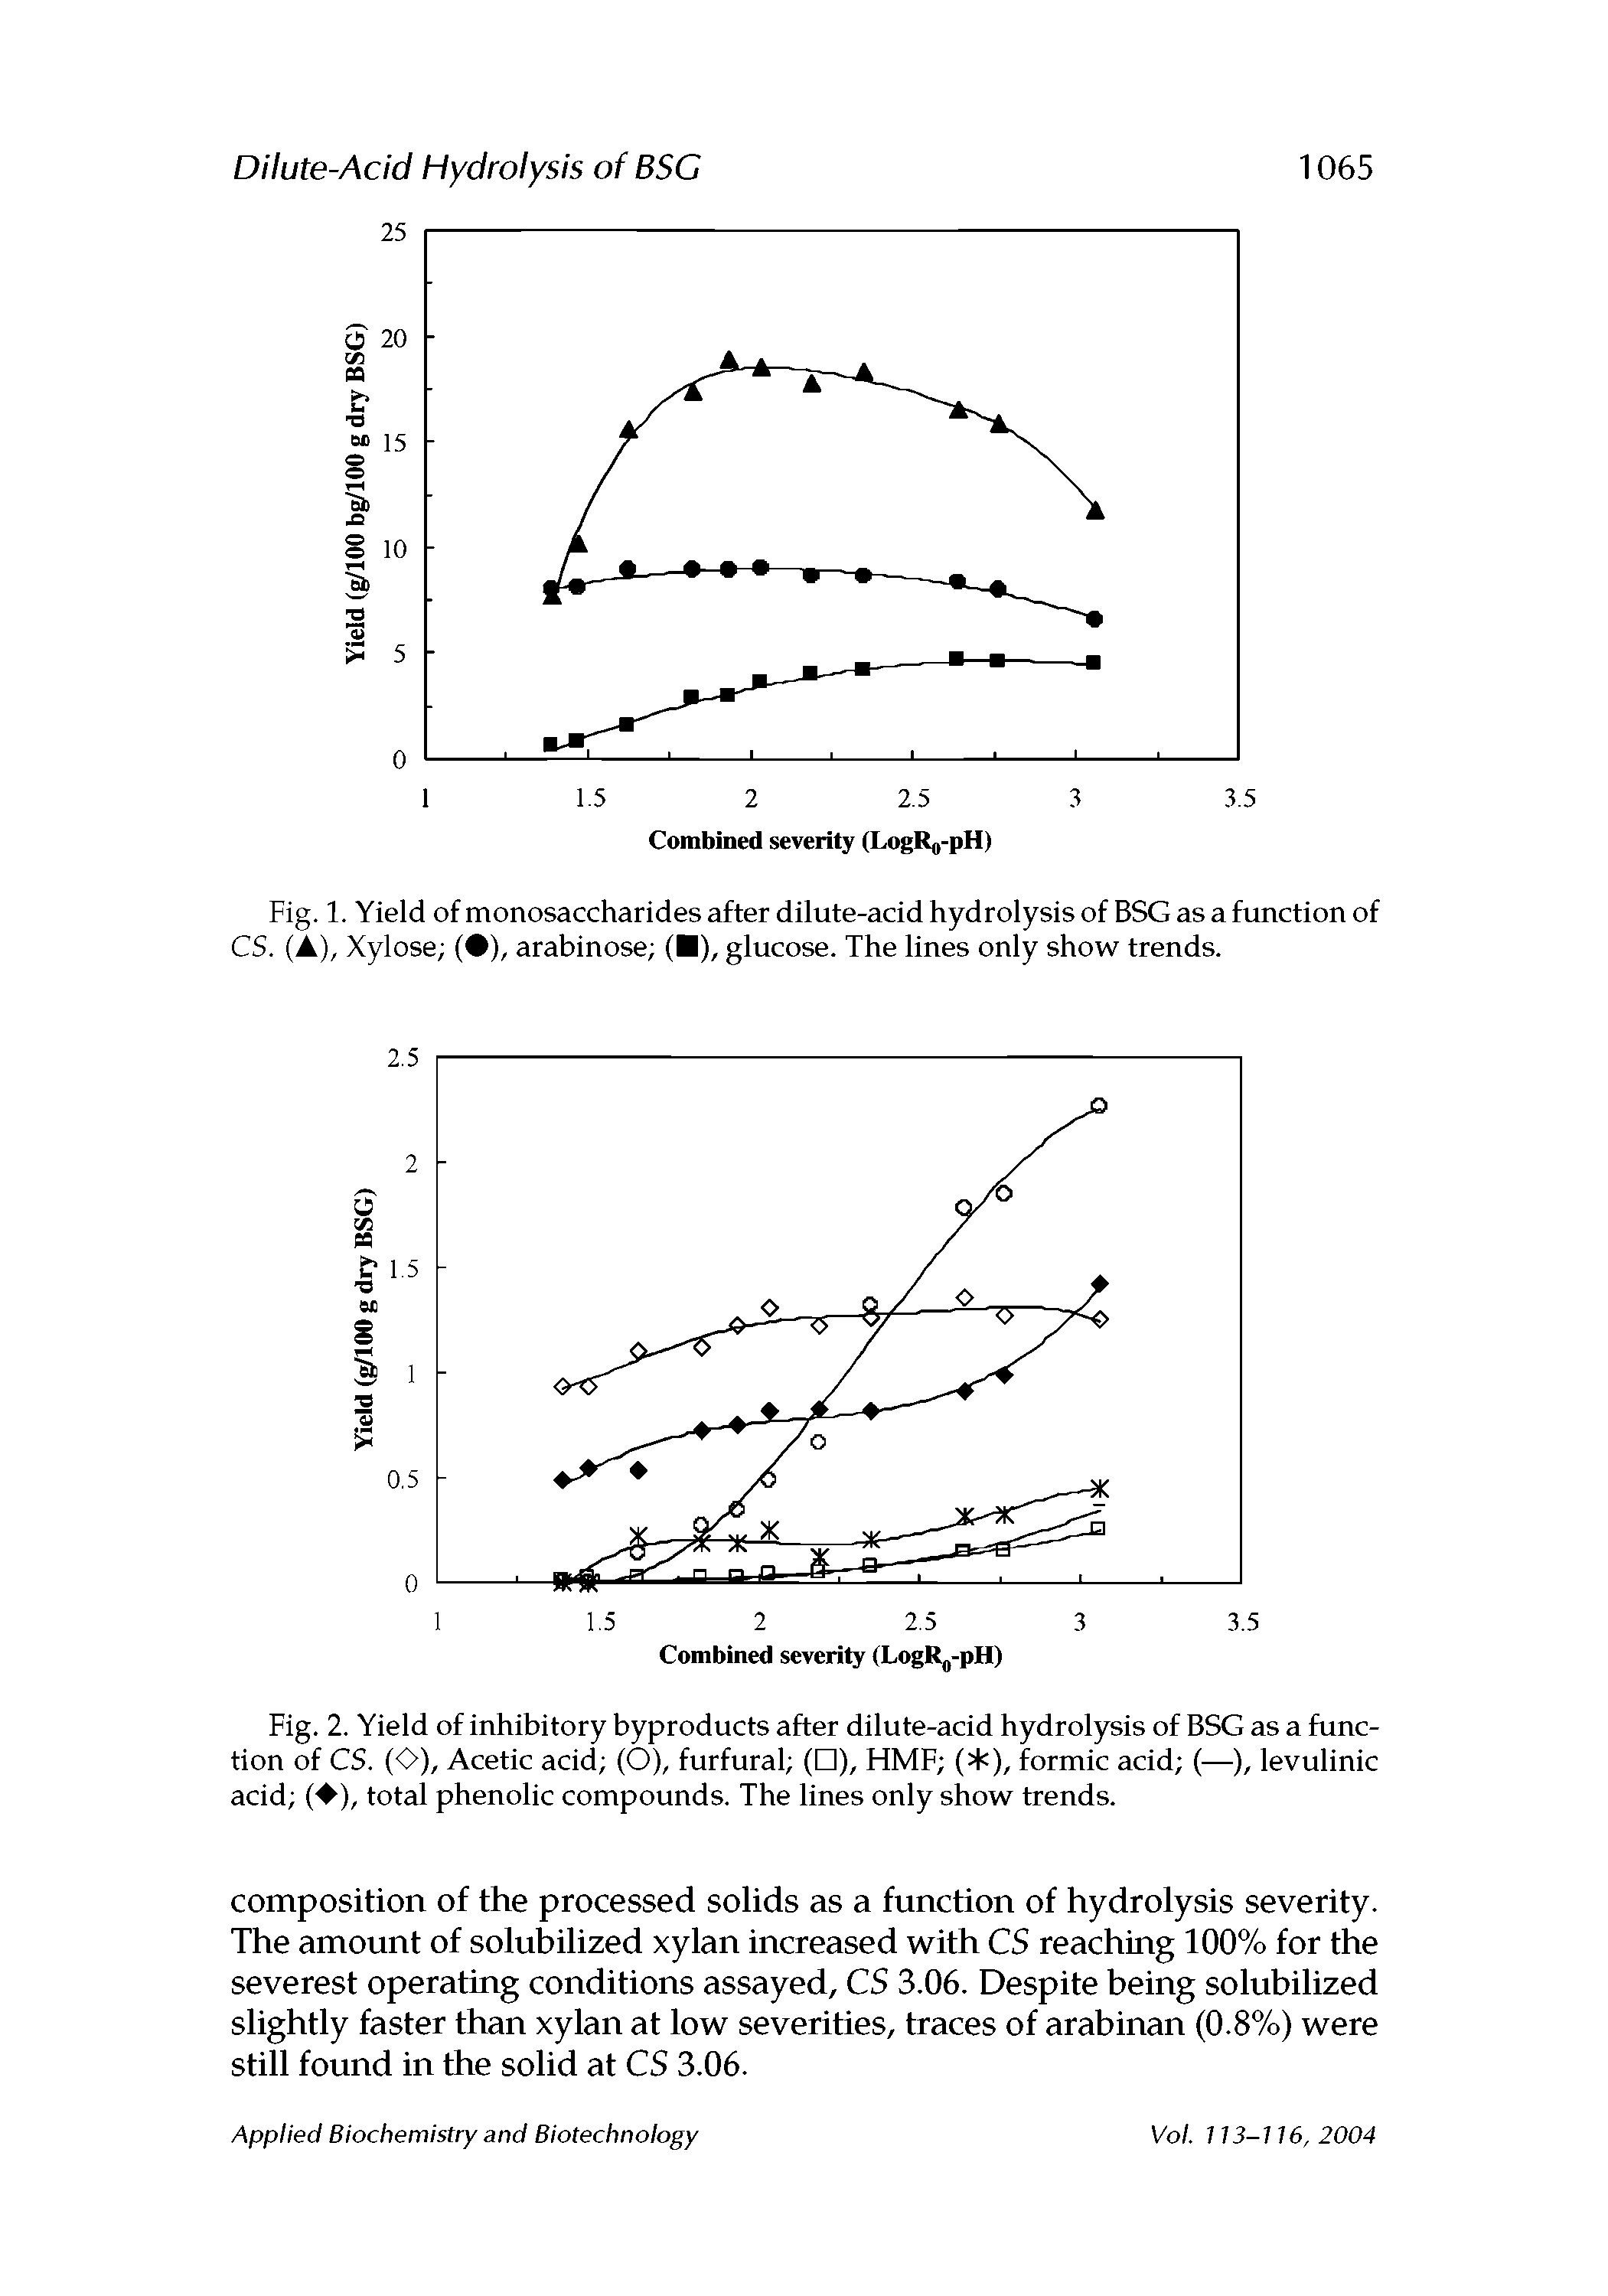 Fig. 1. Yield of monosaccharides after dilute-acid hydrolysis of BSG as a function of CS. (A), Xylose ( ), arabinose ( ), glucose. The lines only show trends.